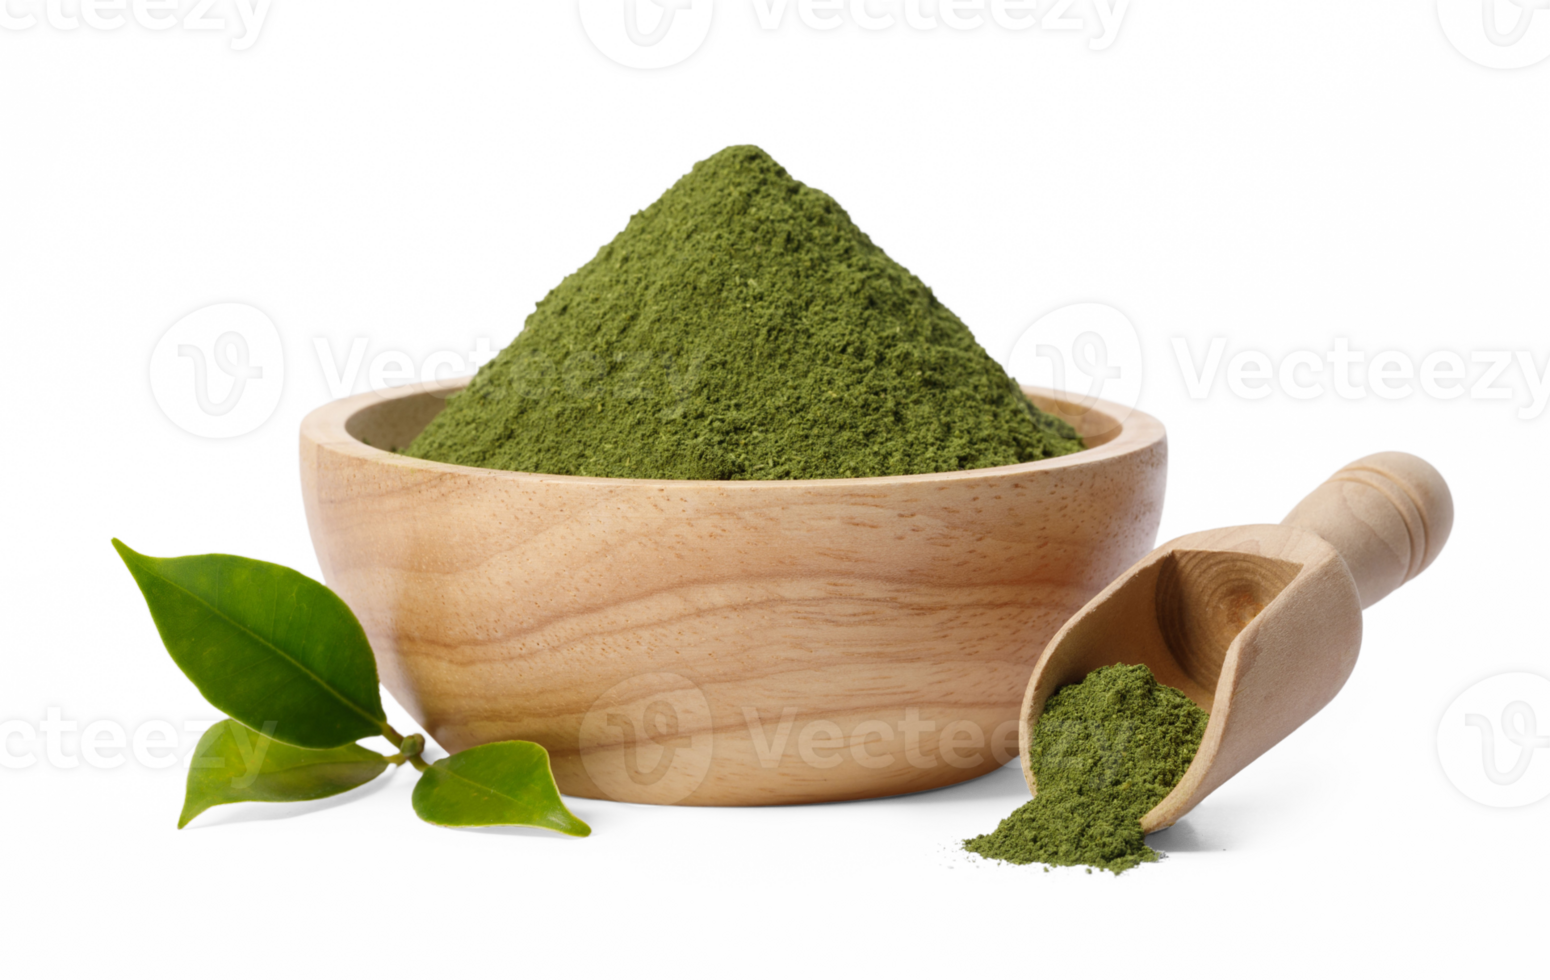 Matcha green tea powder in bowl with Organic green tea leaves, Organic product from the nature for healthy with traditional style, PNG transparency with shadow